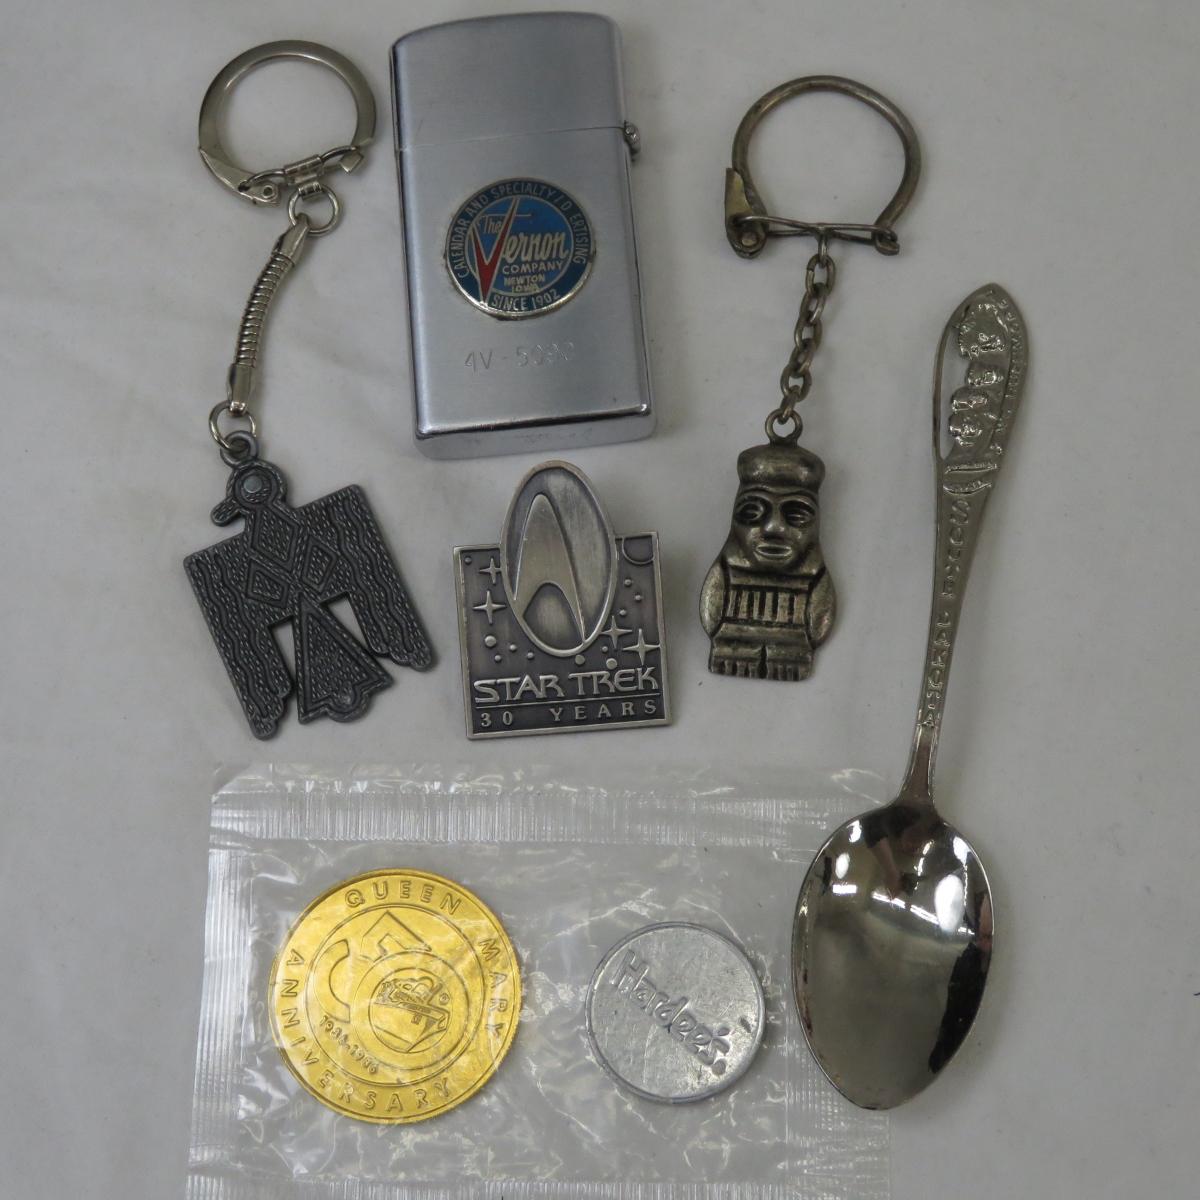 Pocket Knives, Key Chains, Fraternal Pins & More